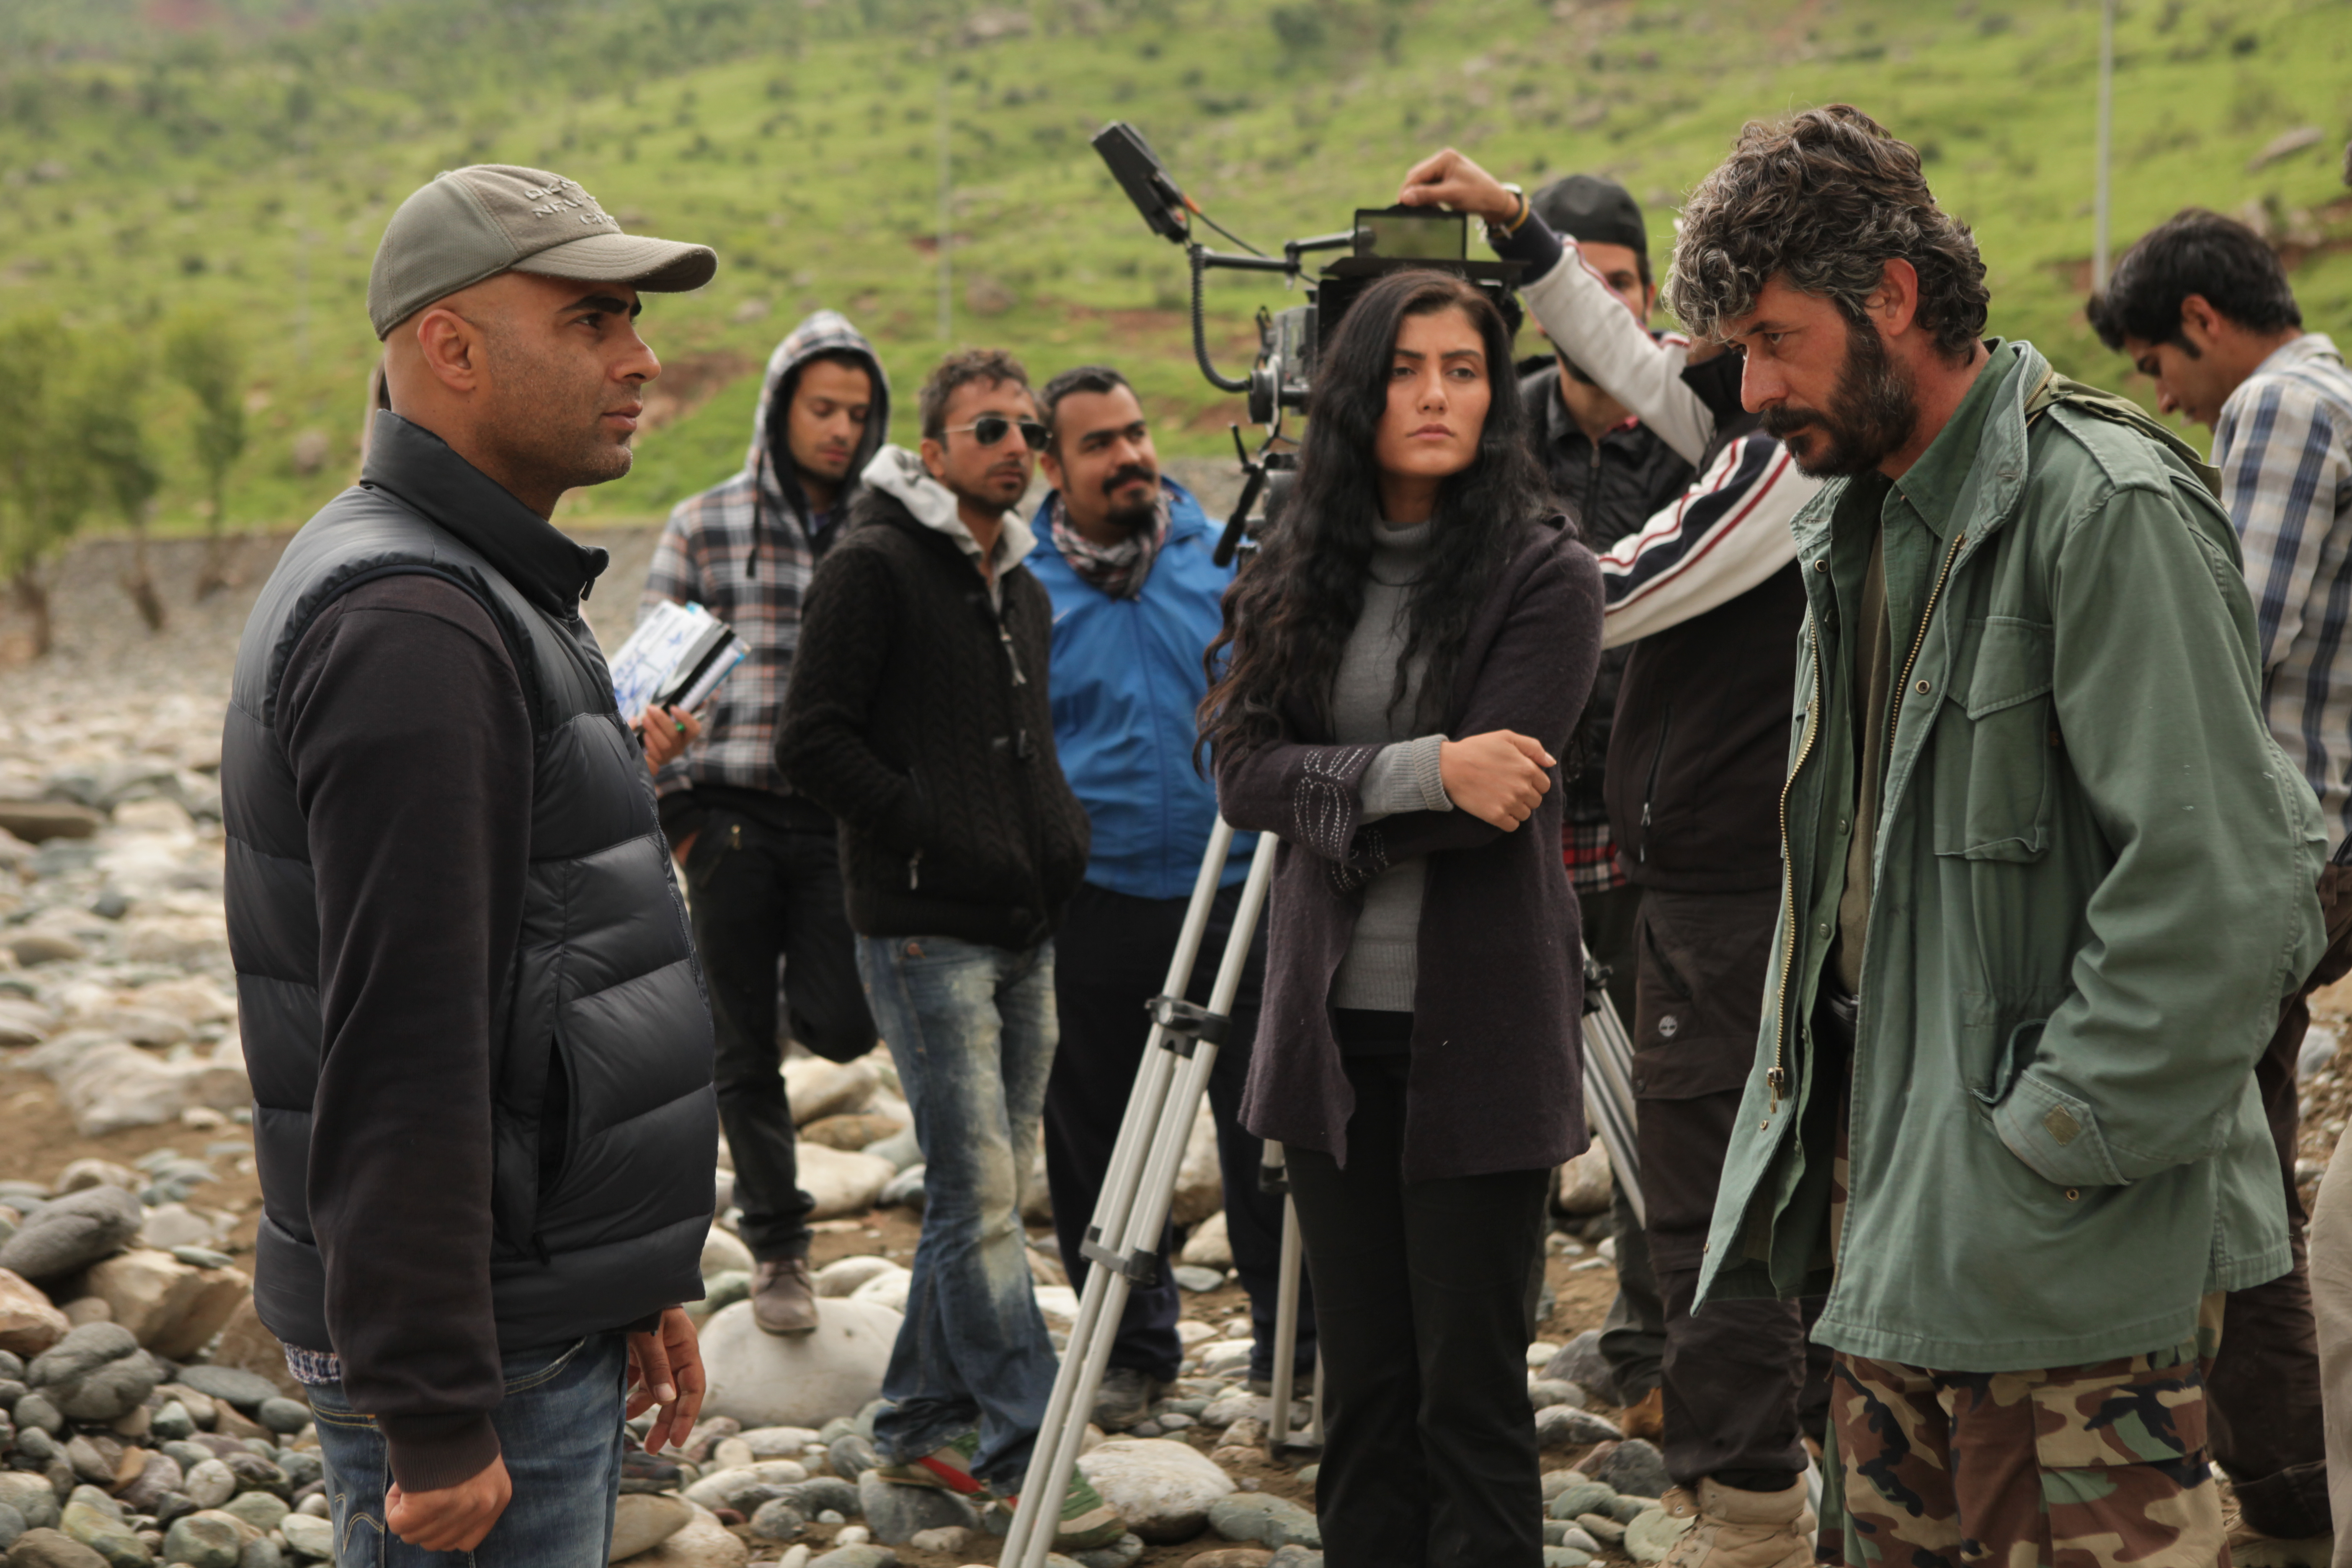 Helly Luv on the set of "Mardan" directed by Batin Ghobadhi.